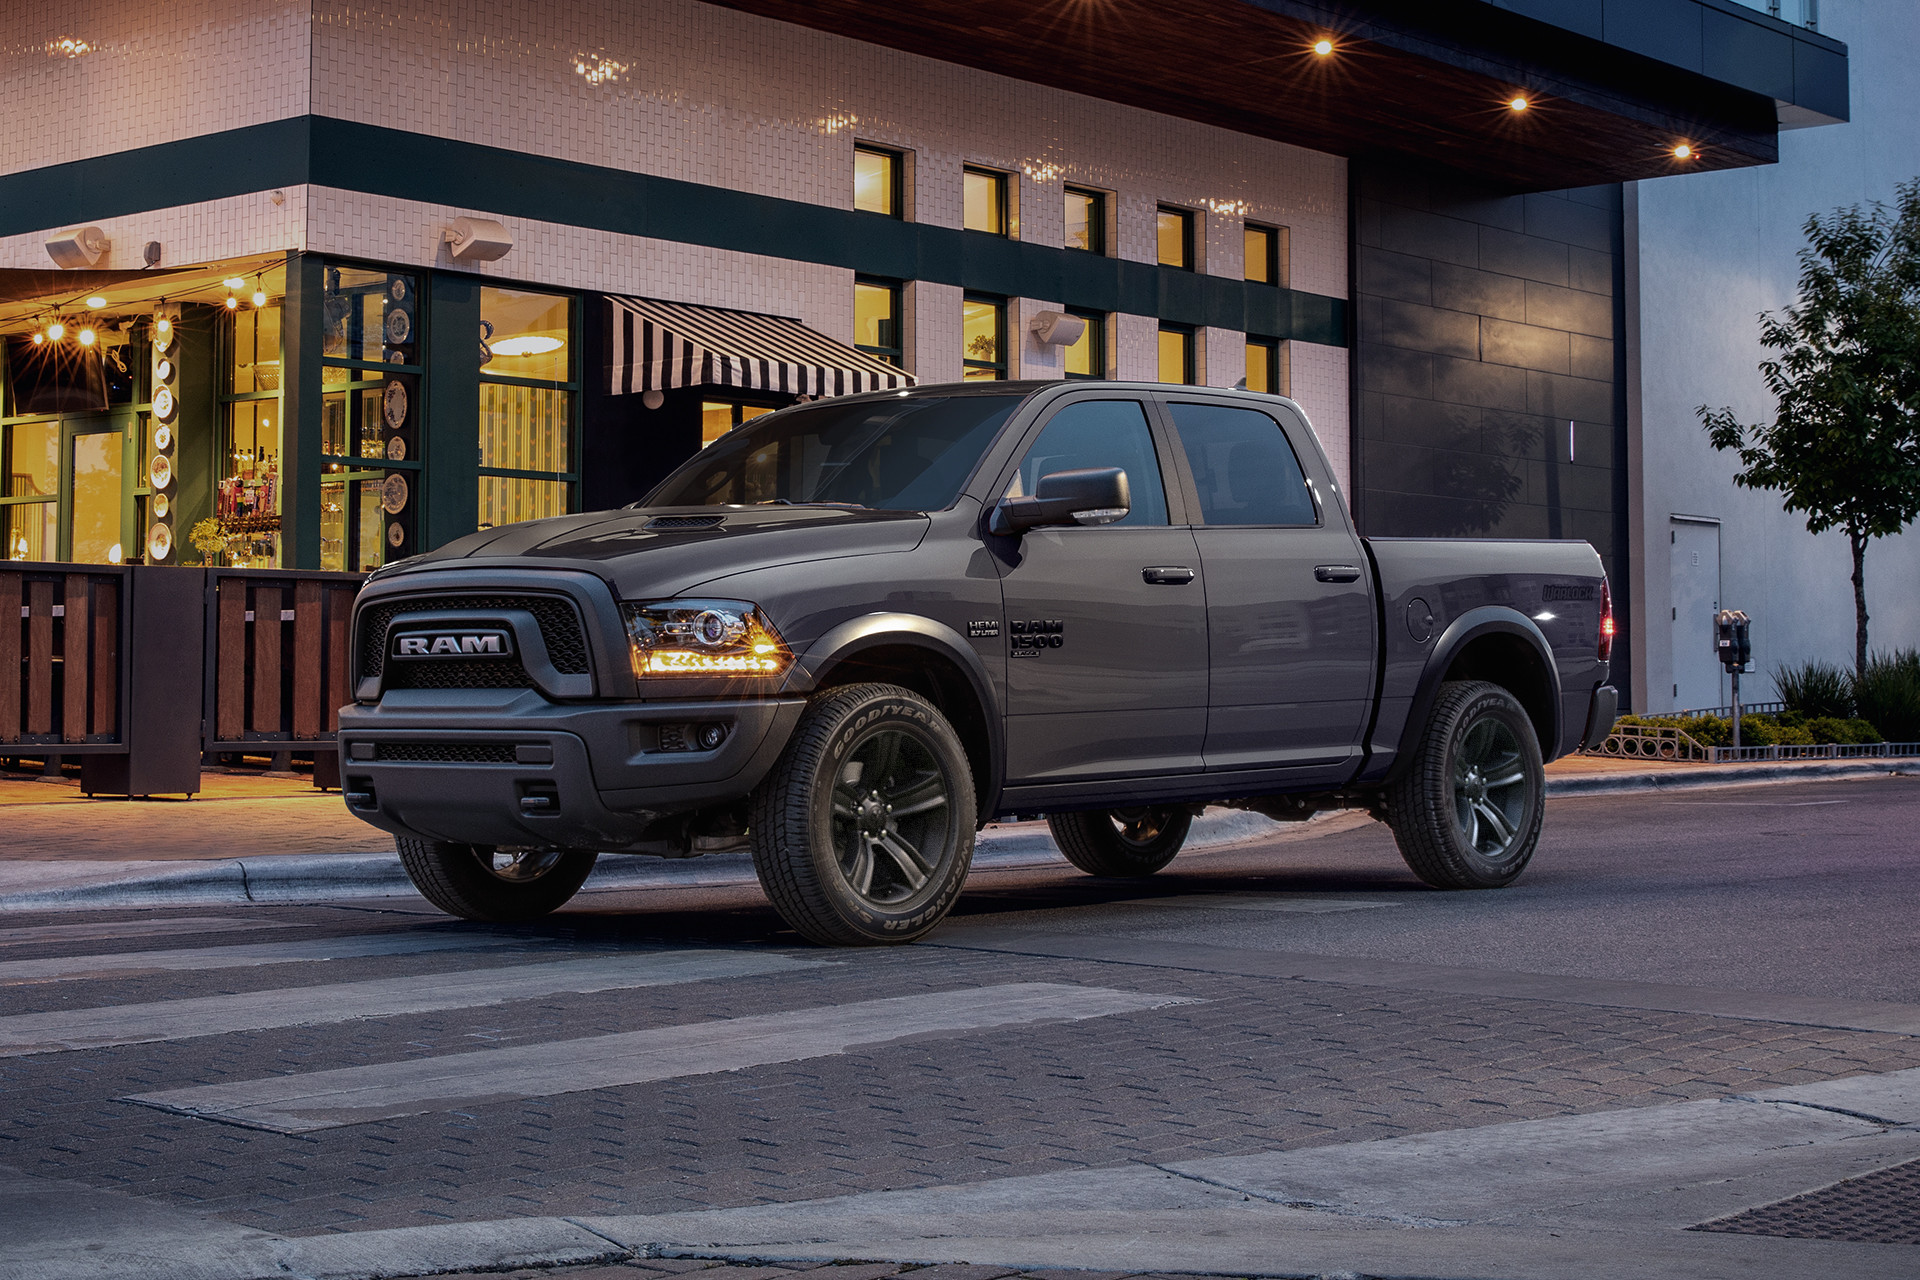 A grey 2022 Ram 1500 Classic, stopped on a road with buildings in the background.